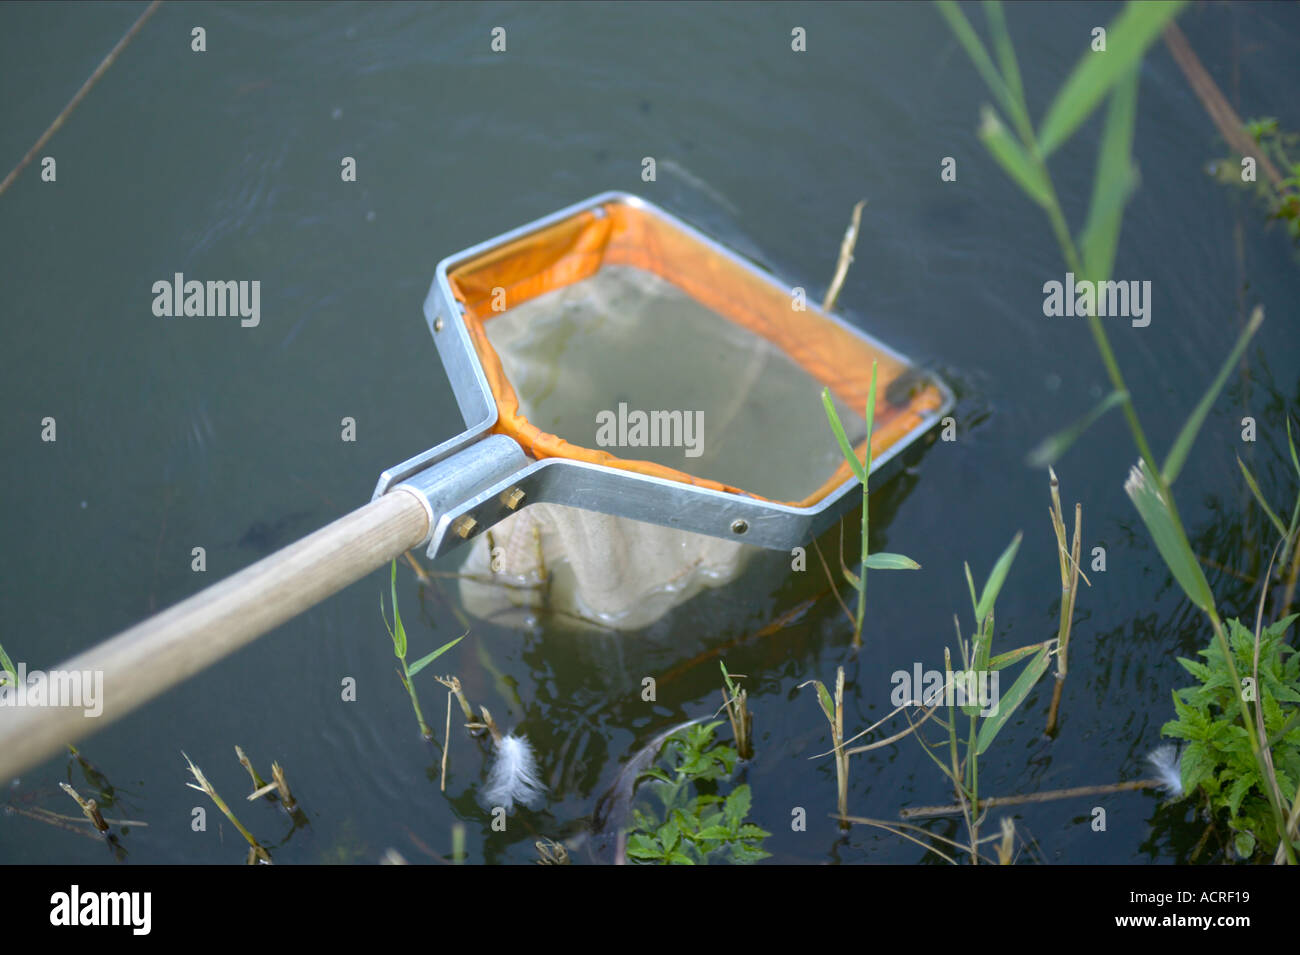 sampling net being used in a pond Lancashire England Stock Photo